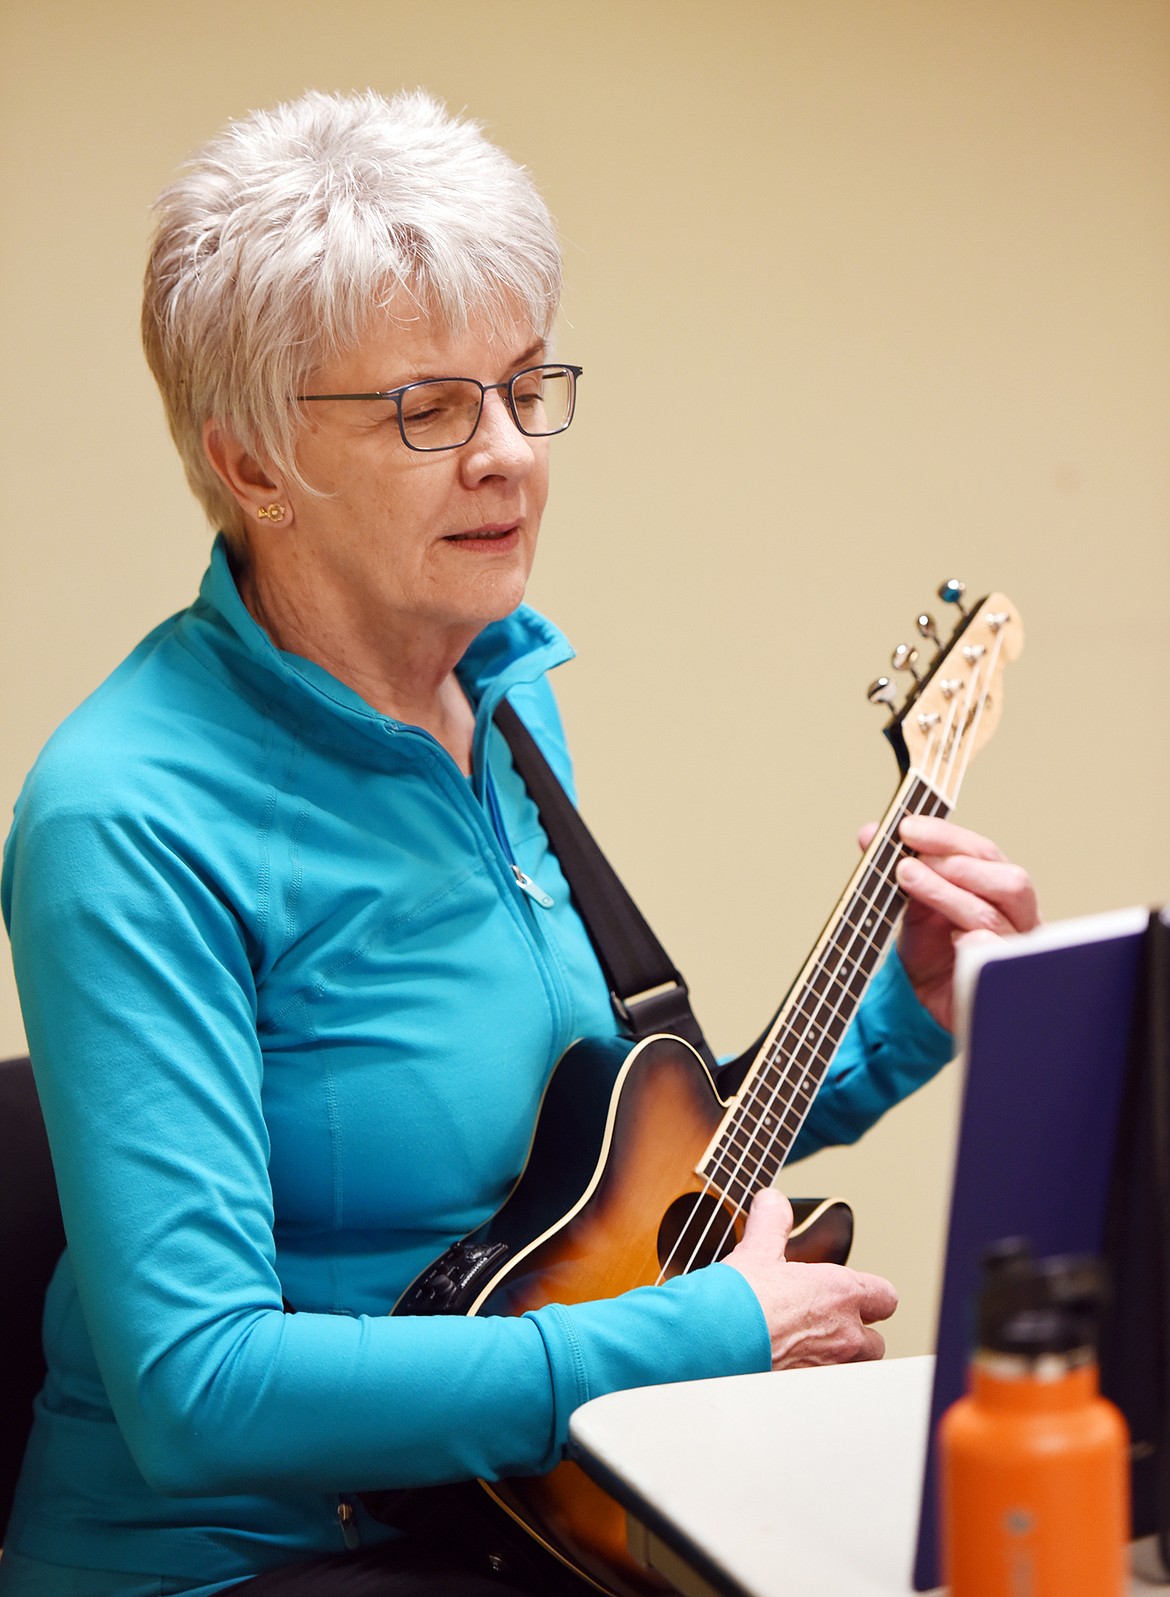 ROBIN RILEY and other ukulele strummers practice in the meeting room of ImagineIF Library Tuesday, April 18, in Kalispell.
(Brenda Ahearn/Daily Inter Lake)